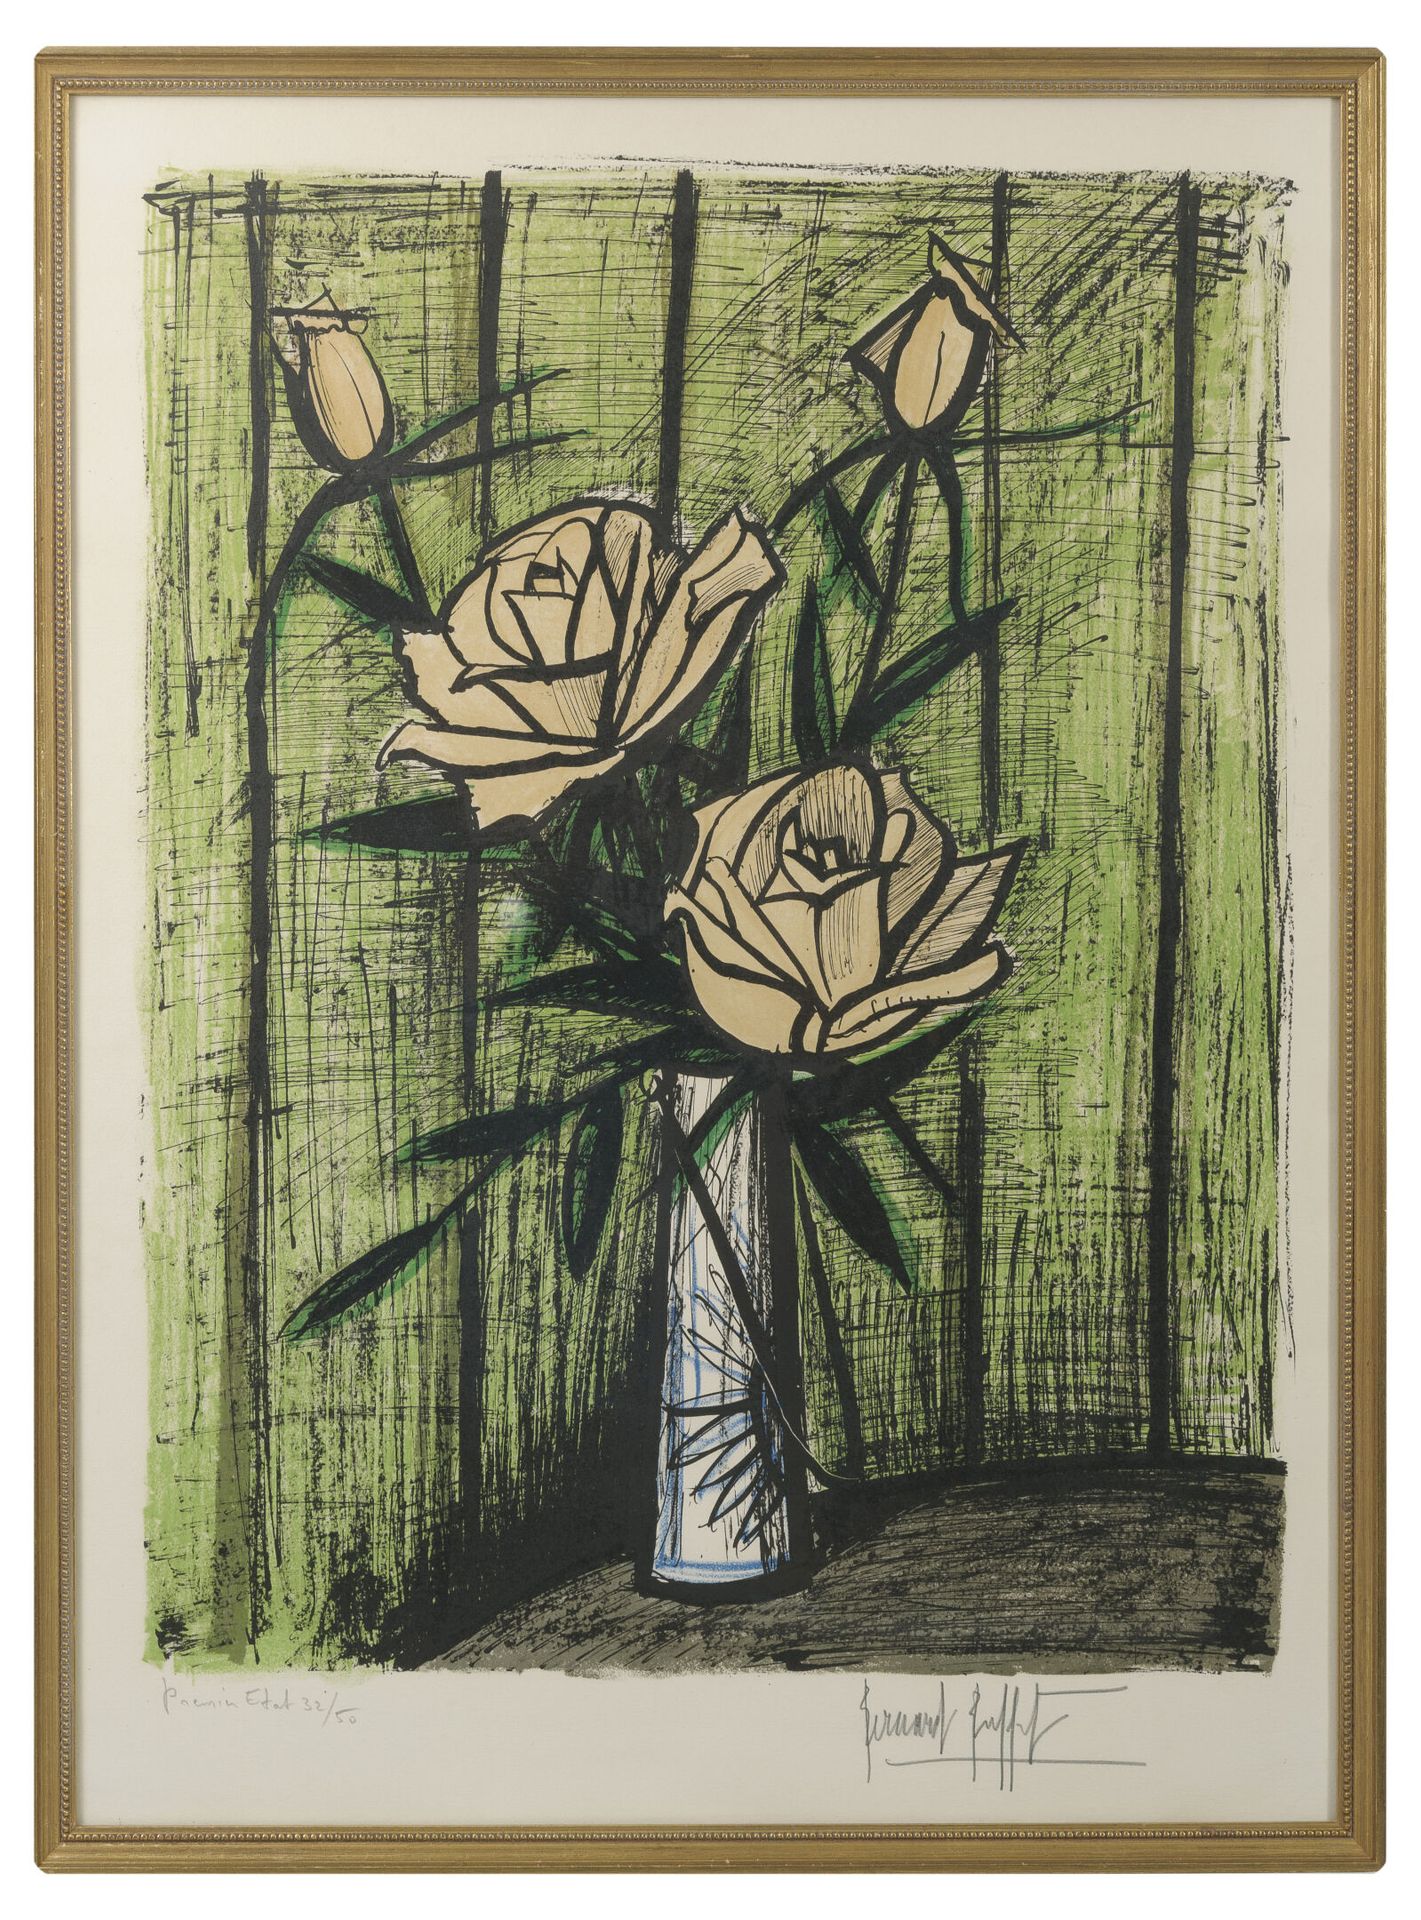 Bernard BUFFET (1928-1999) Roses, first state, 1980.

Lithograph in colours on p&hellip;